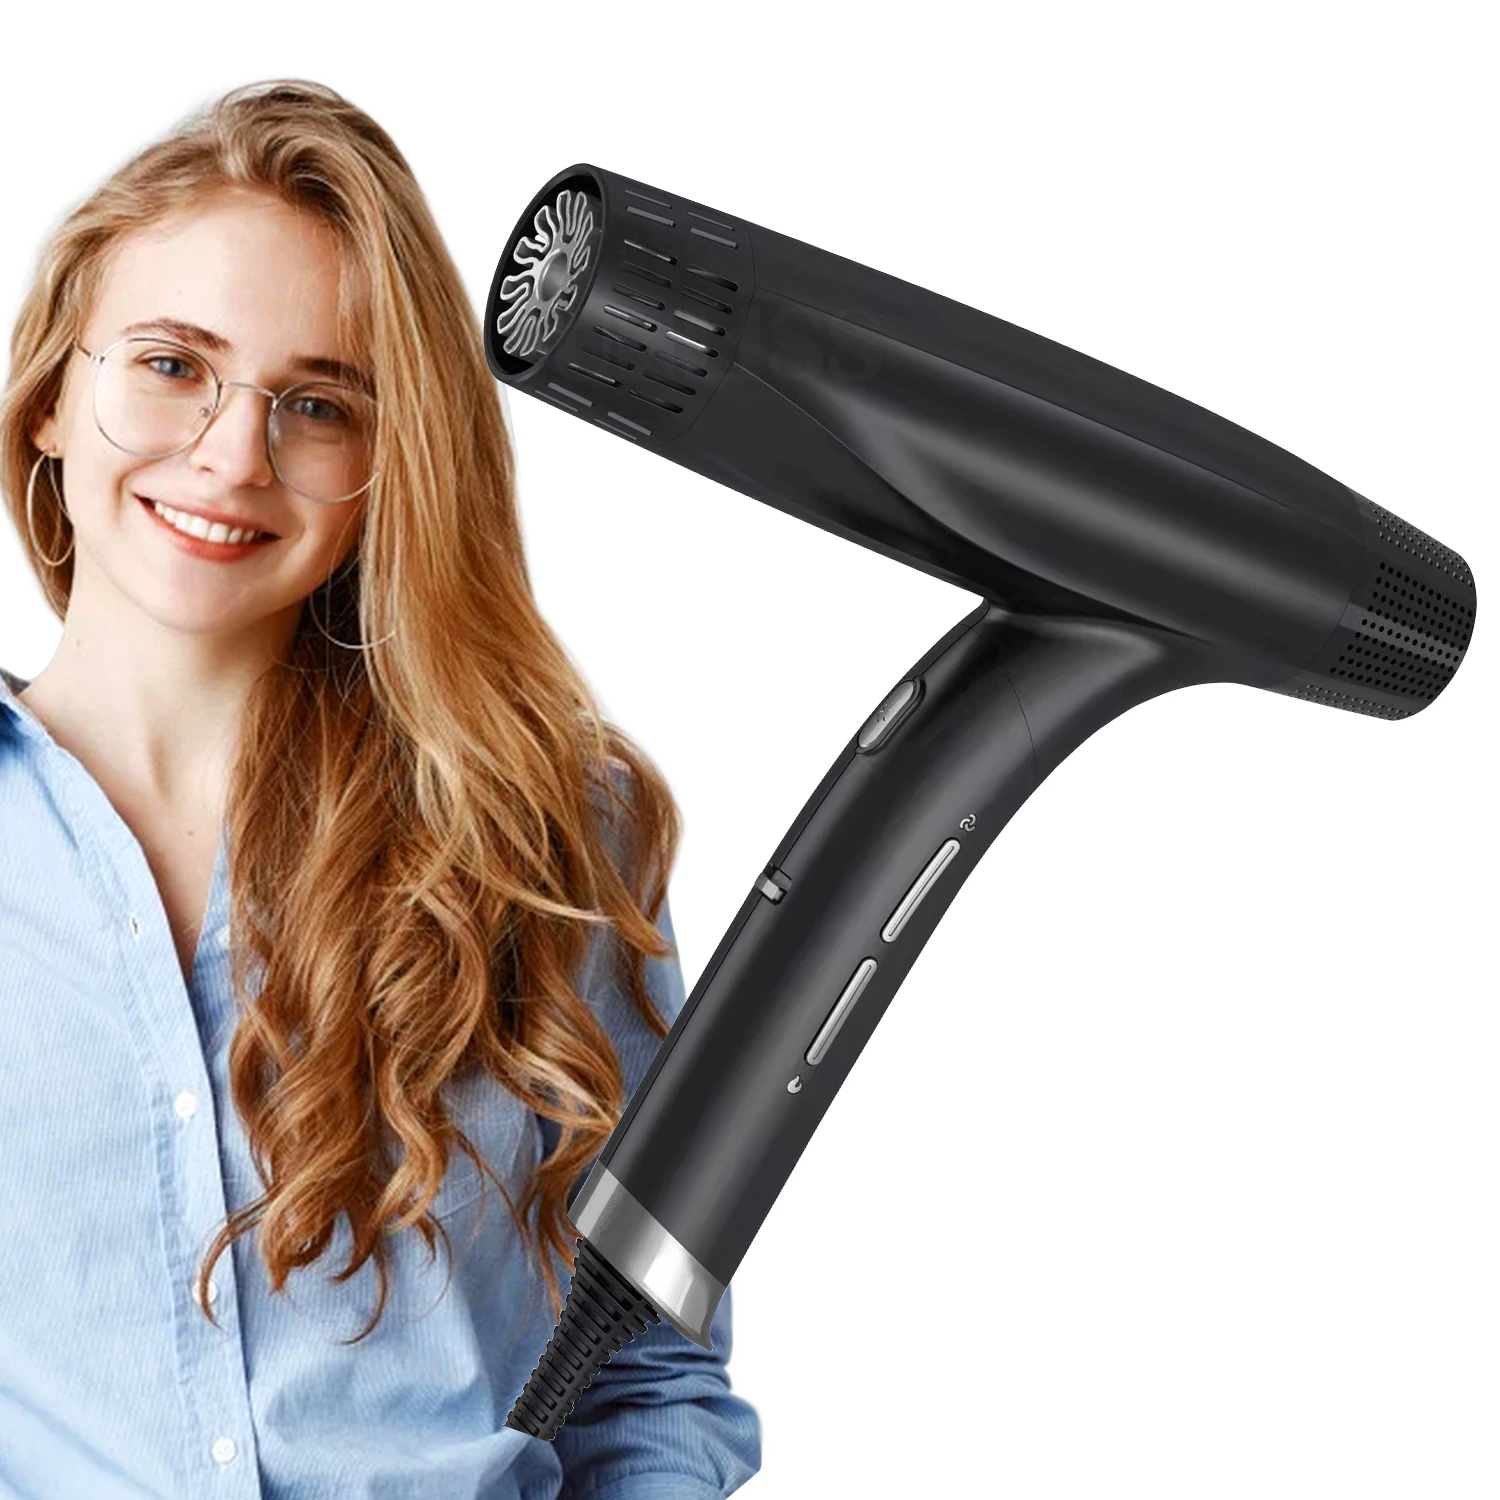 UKLISS High Speed Hair Dryer Professional Salon Ionic Blow Dryer Negative Ions Fast-Drying & Max Shine Hair Drying Machine